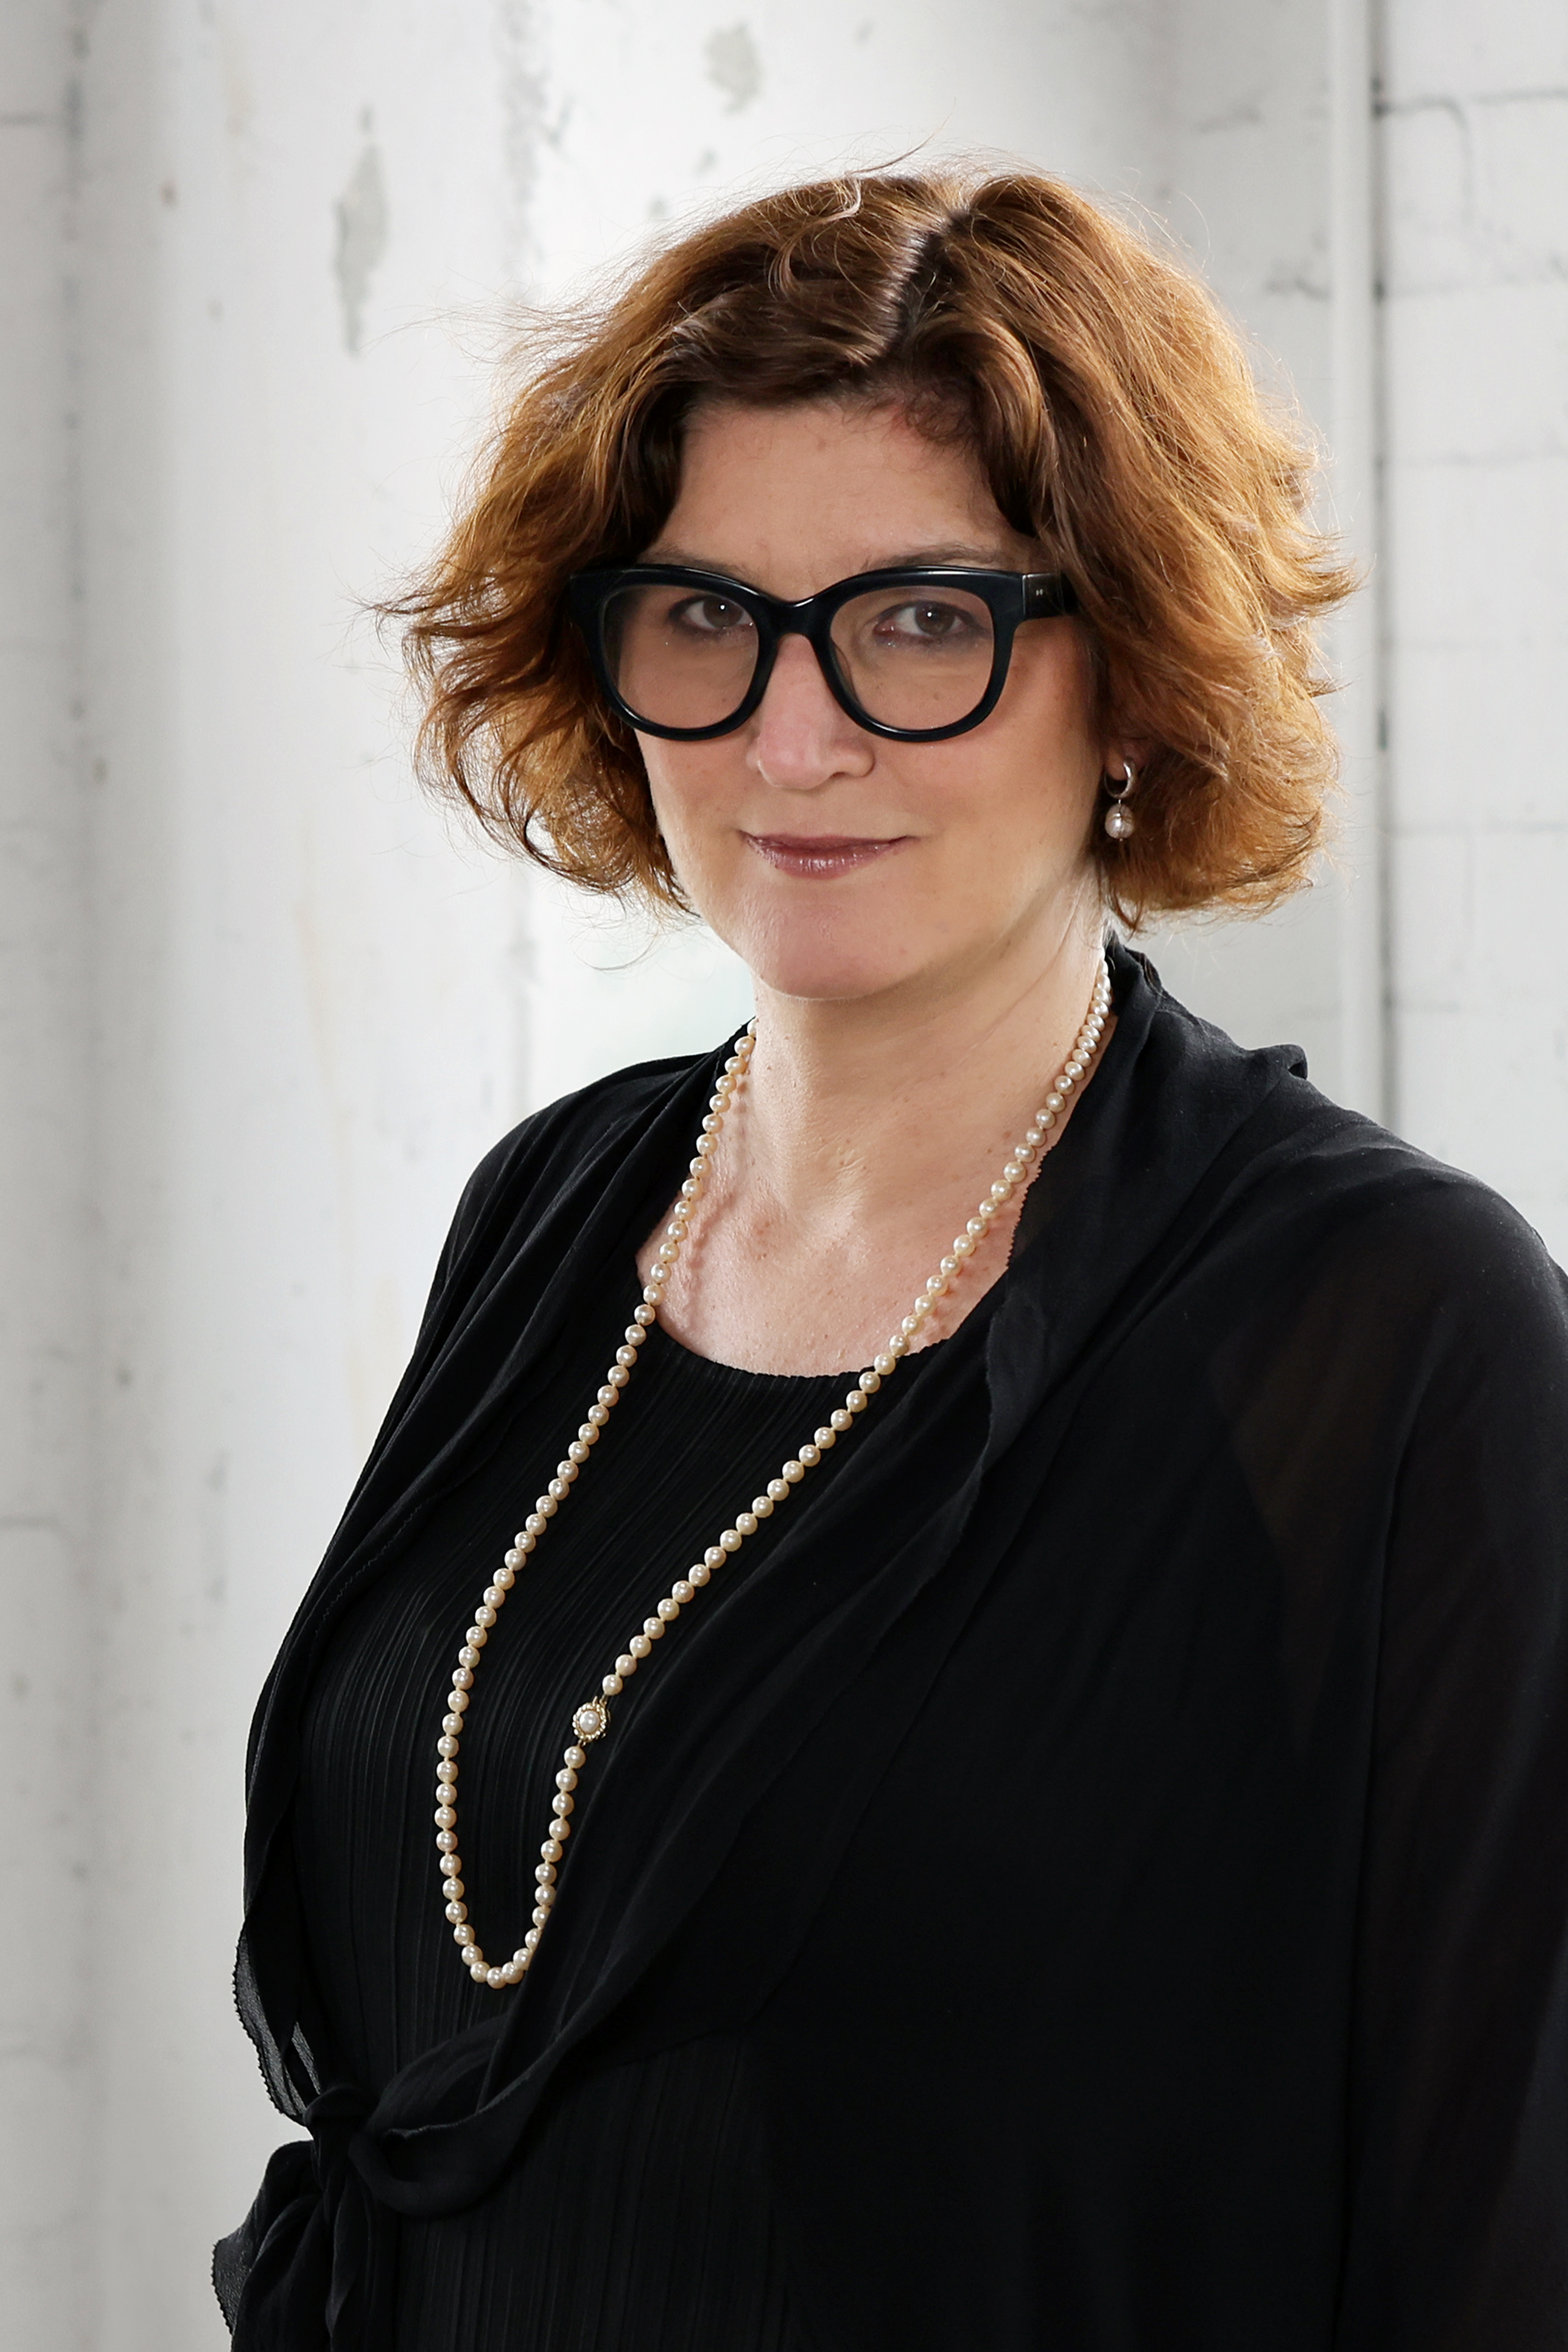 Middle-aged white woman with short, wavy auburn hair wears striking black glasses, a black blazer and white pearls.